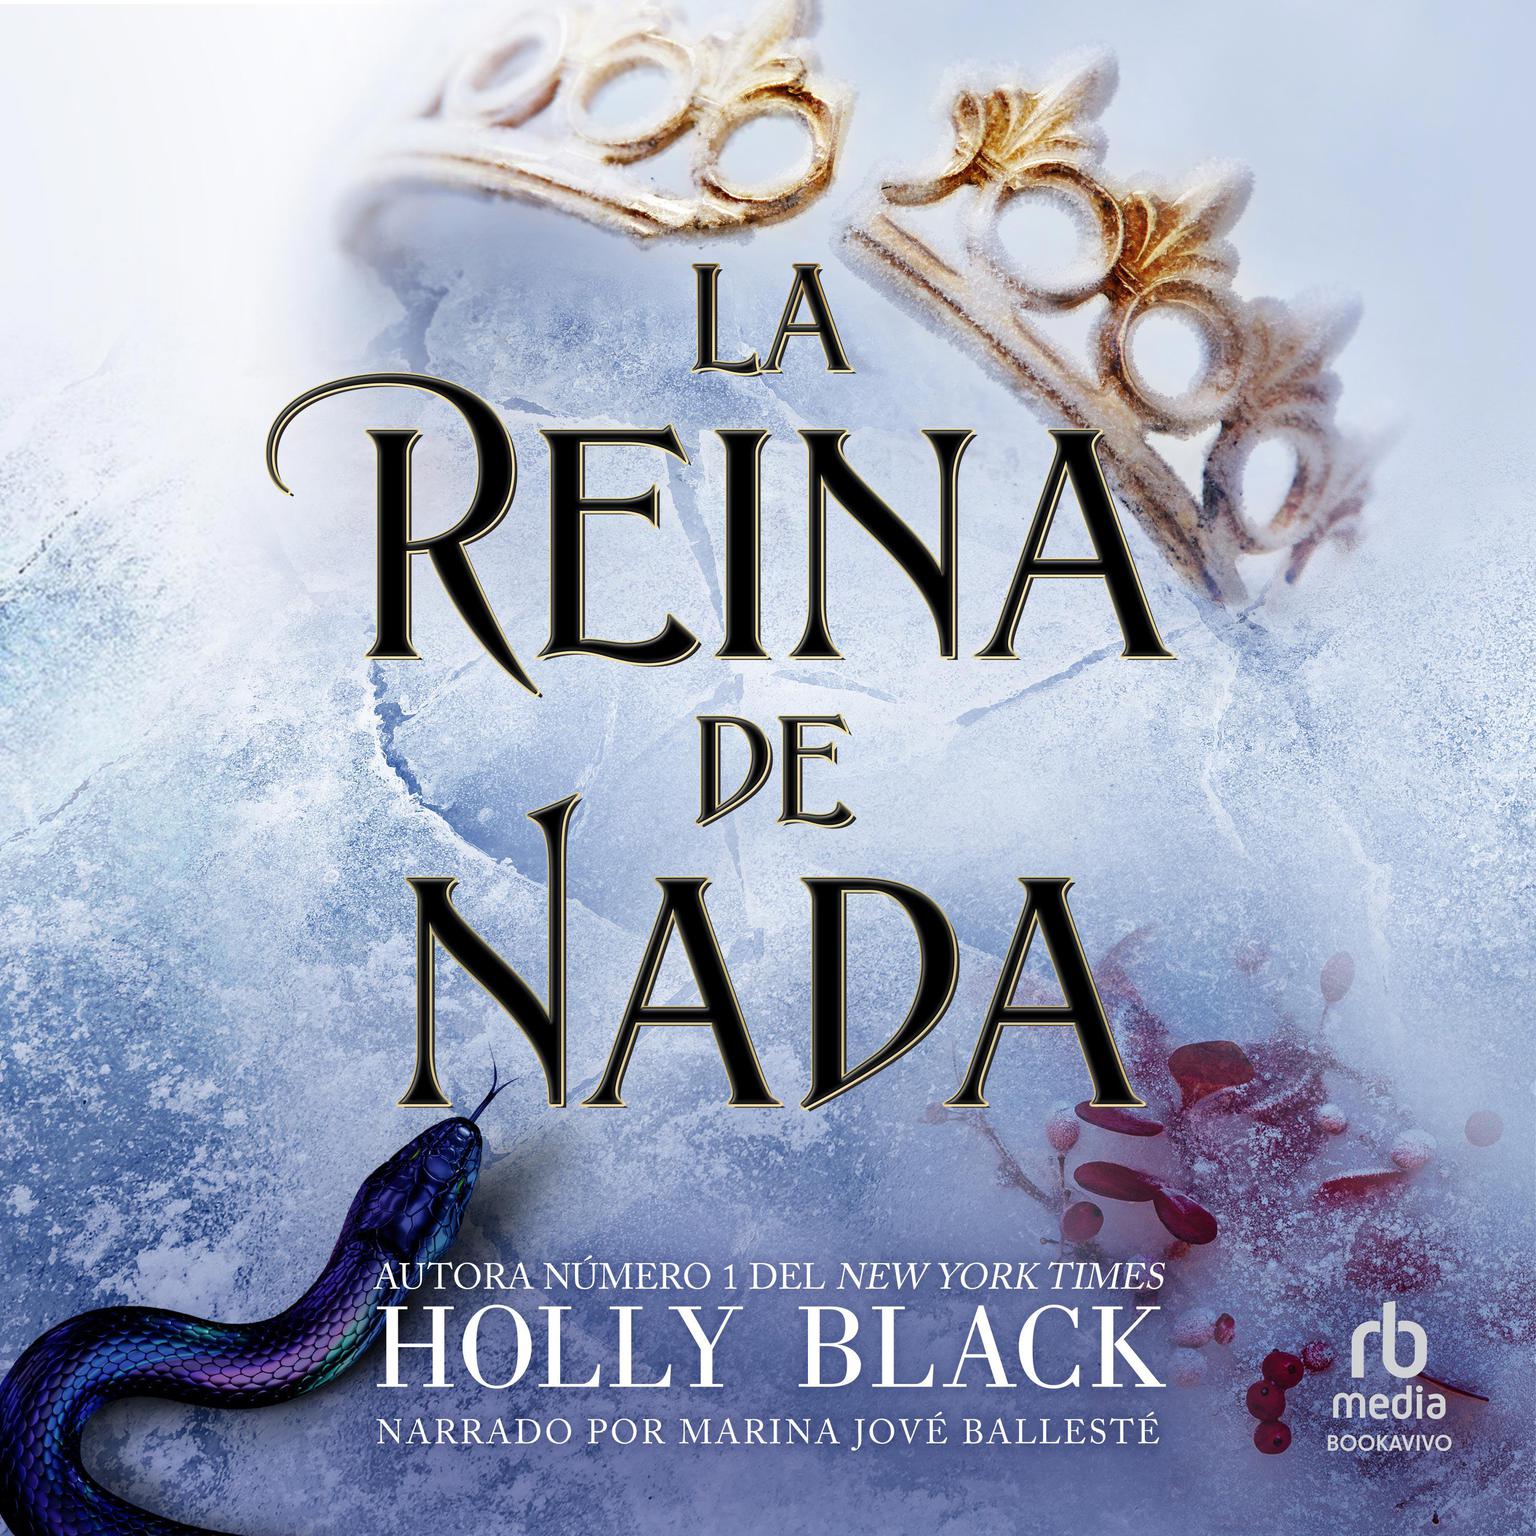 La reina de nada (The Queen of Nothing): Los habitantes del aire, 3 (The Folk of the Air Series) Audiobook, by Holly Black